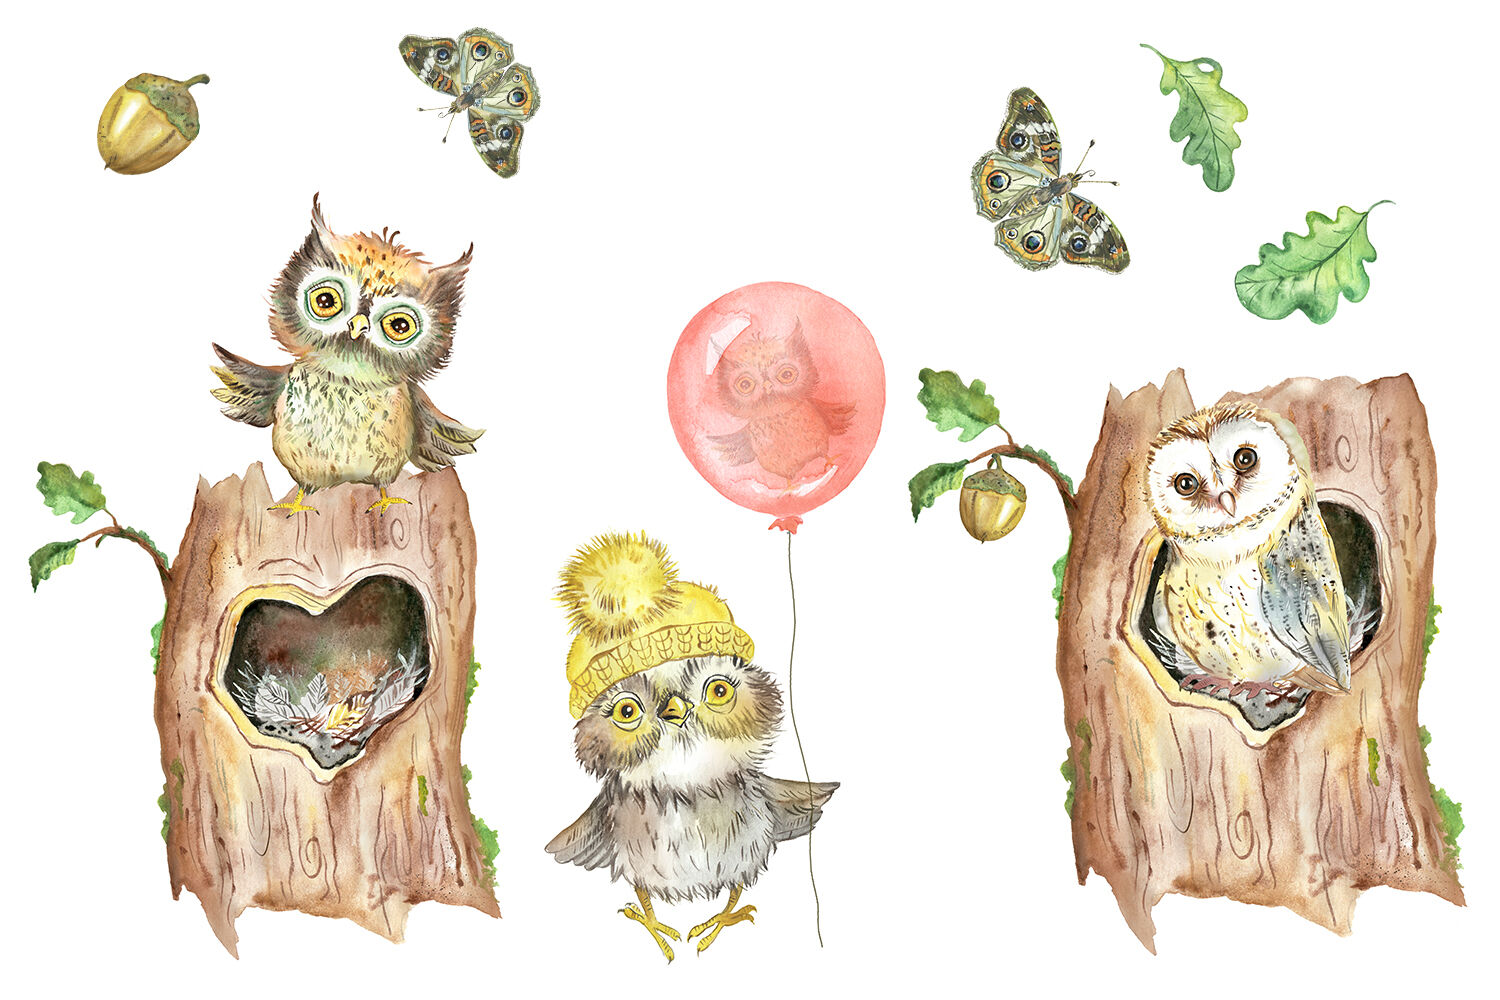 Download Clip Art Watercolor Owl Owls Watercolor Clipart Forest Clipart Baby Animal Clipart Kids Illustration Png Woodland Clipart Owl Printable Art Collectibles